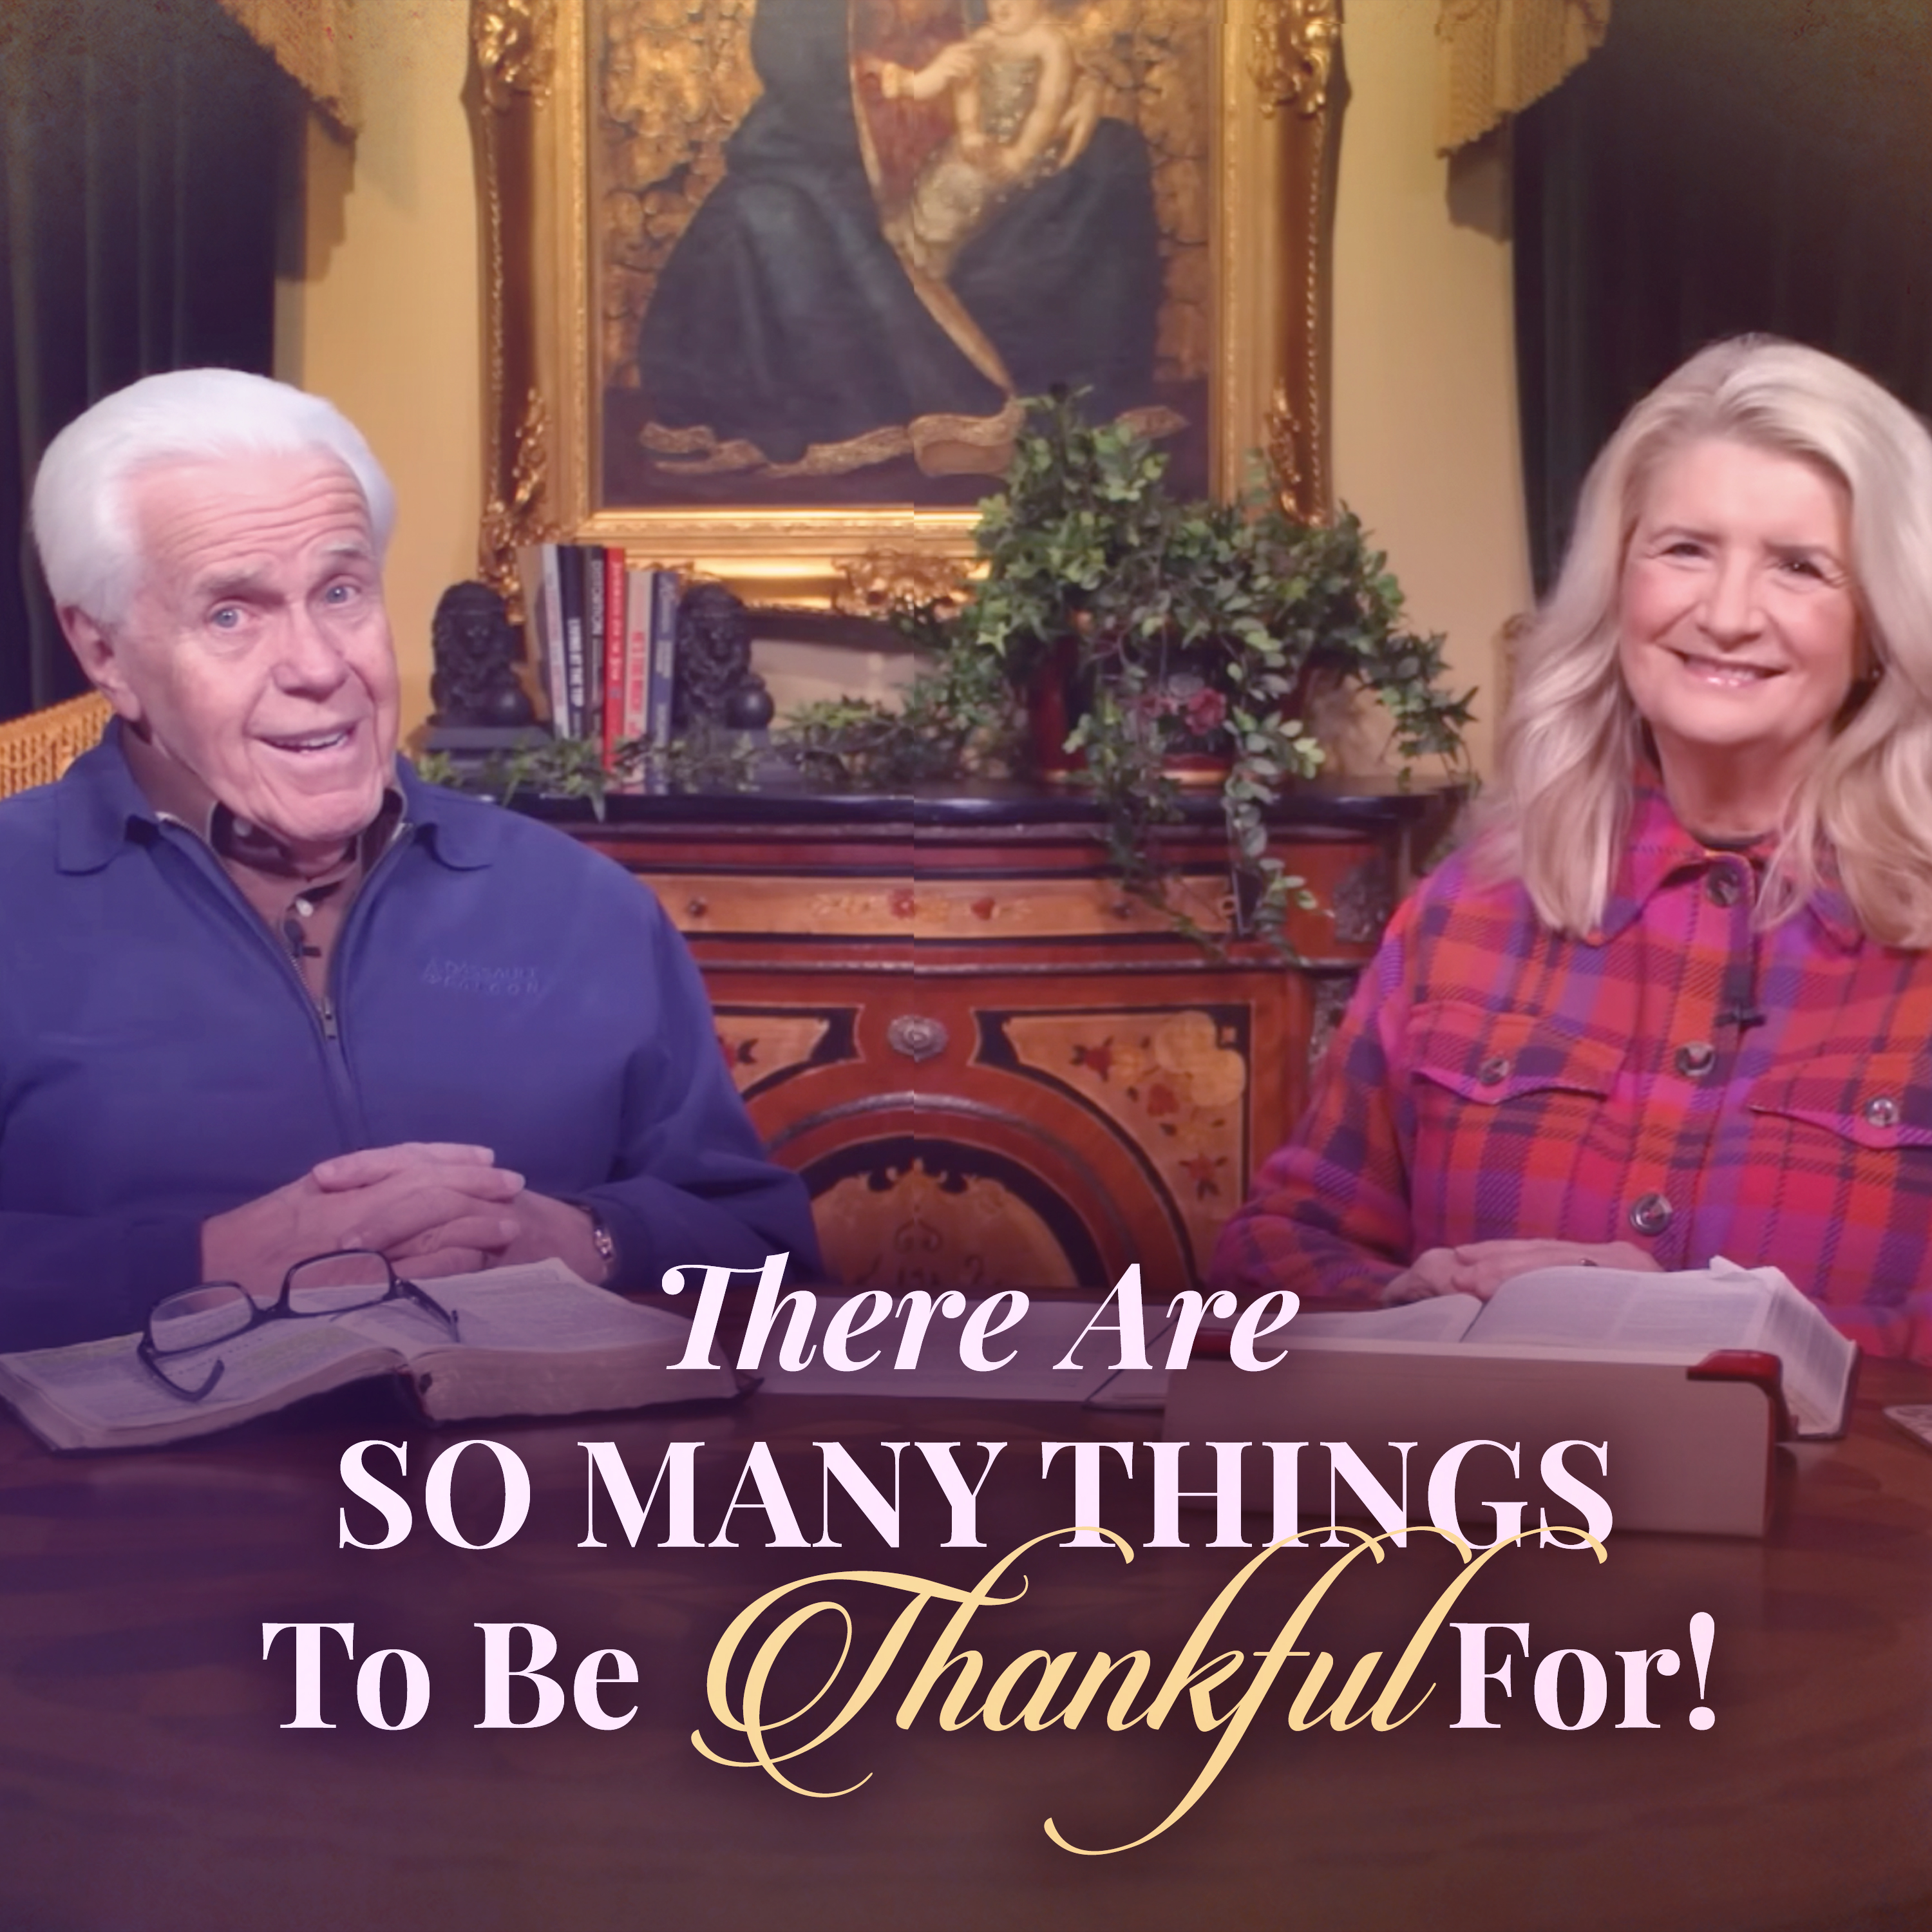 There Are So Many Things To Be Thankful For!